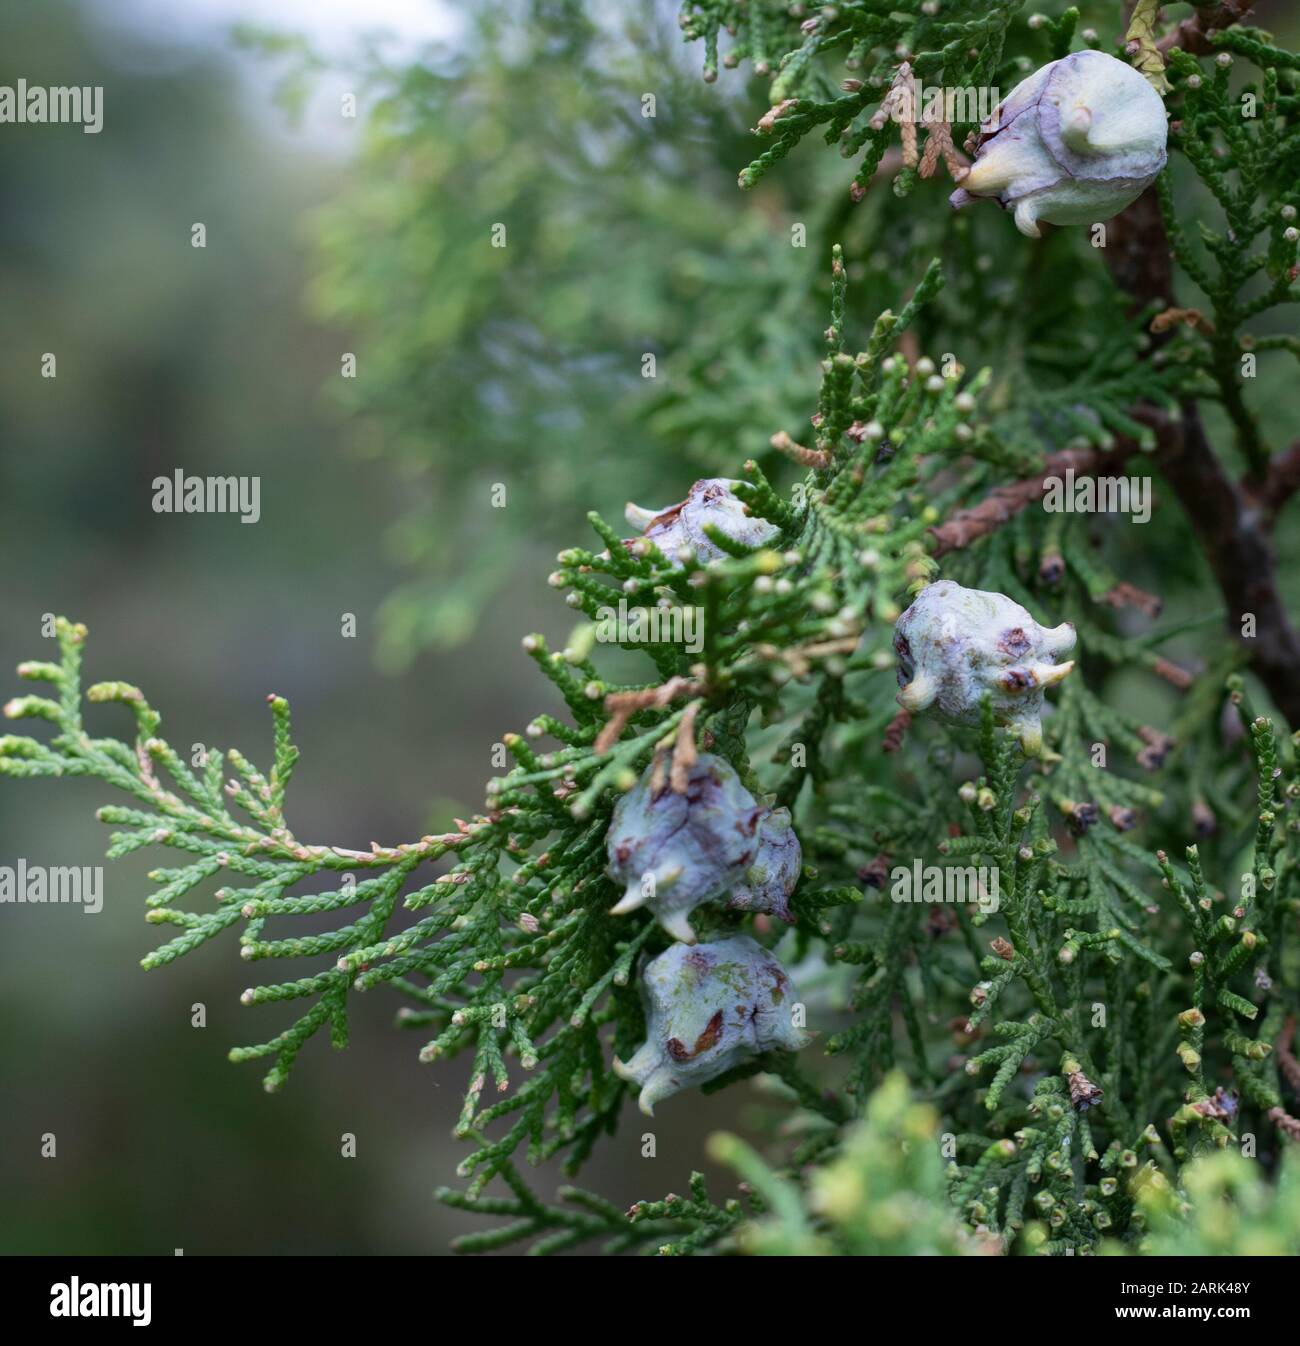 Close-up shoot of Platycladus orientalis plant. Its homeland is northern China. Stock Photo